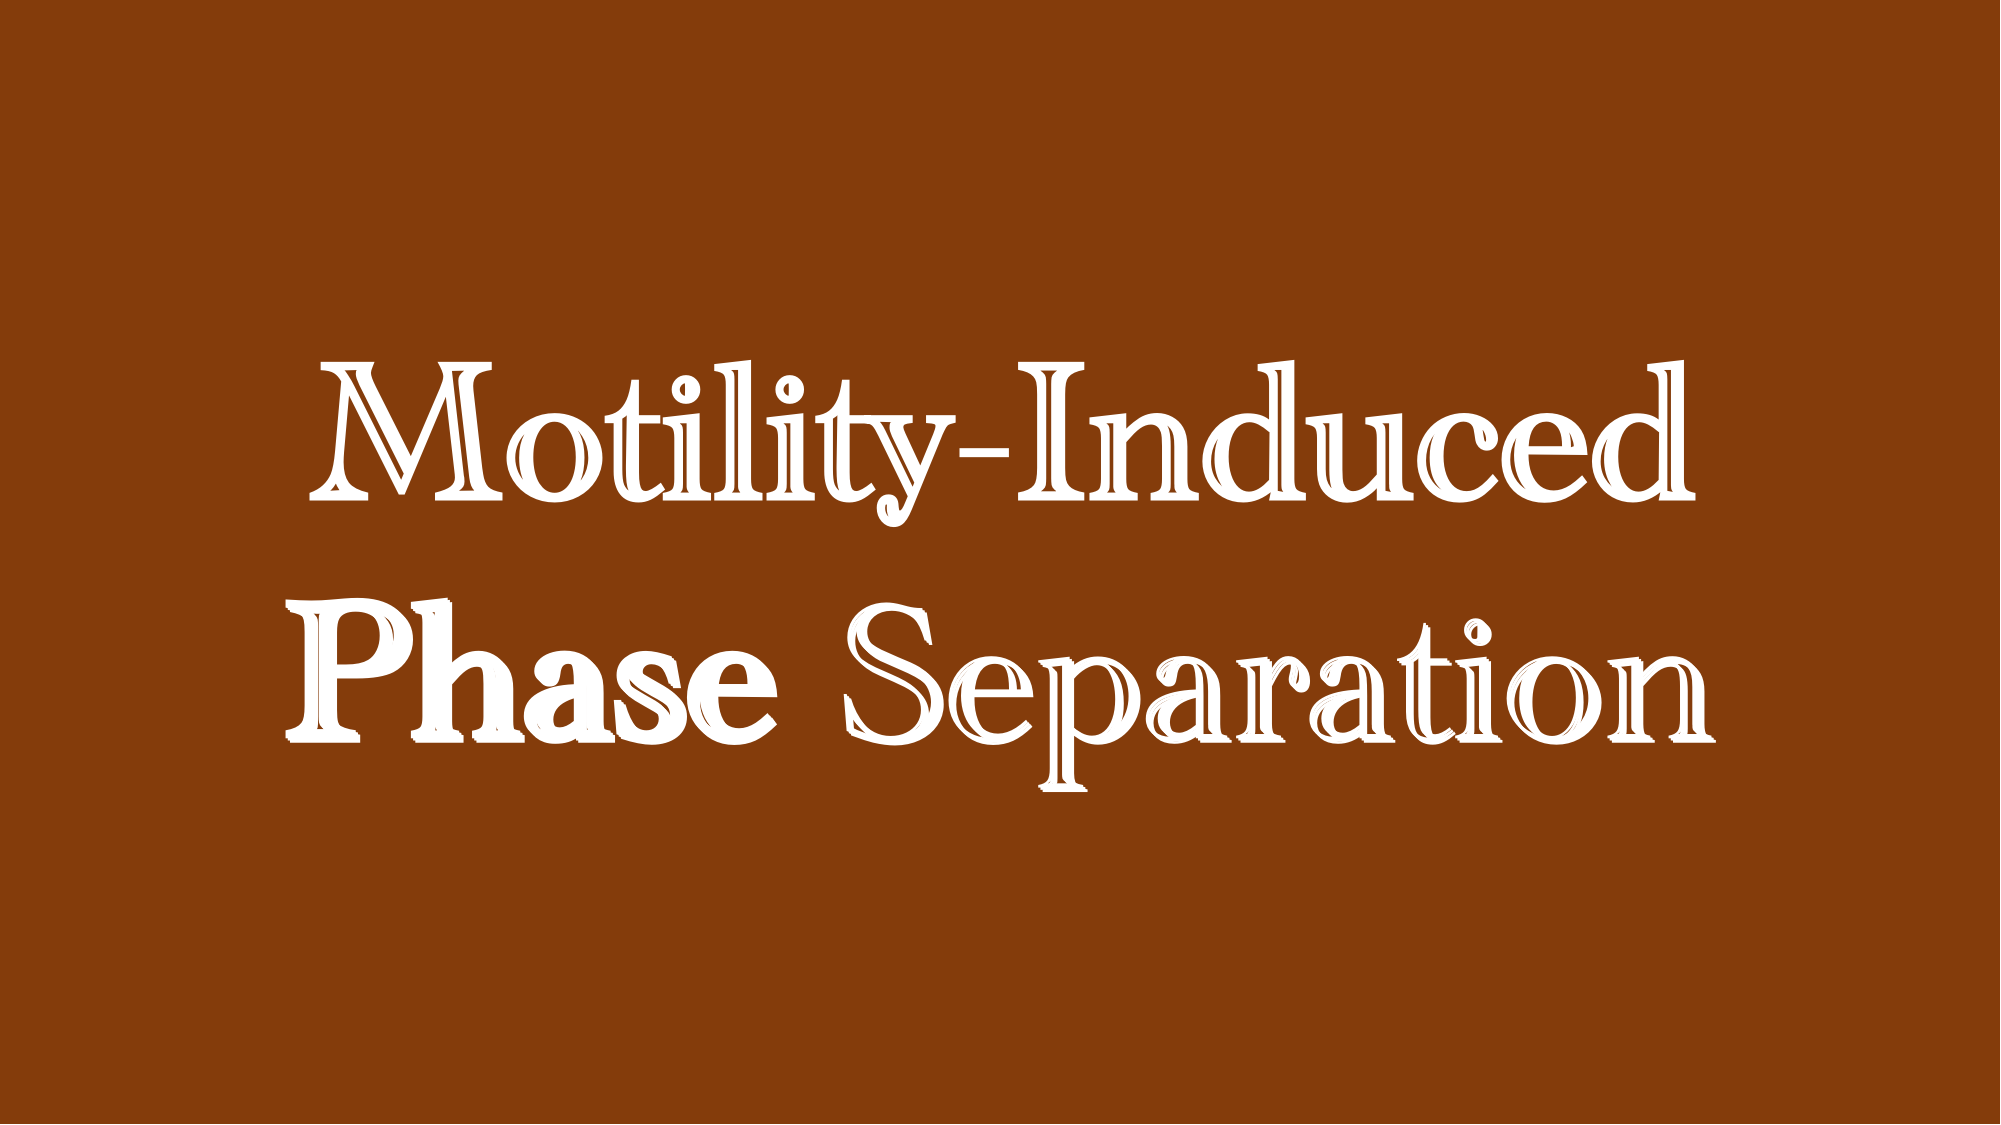 An Introduction to Motility-Induced Phase Separation